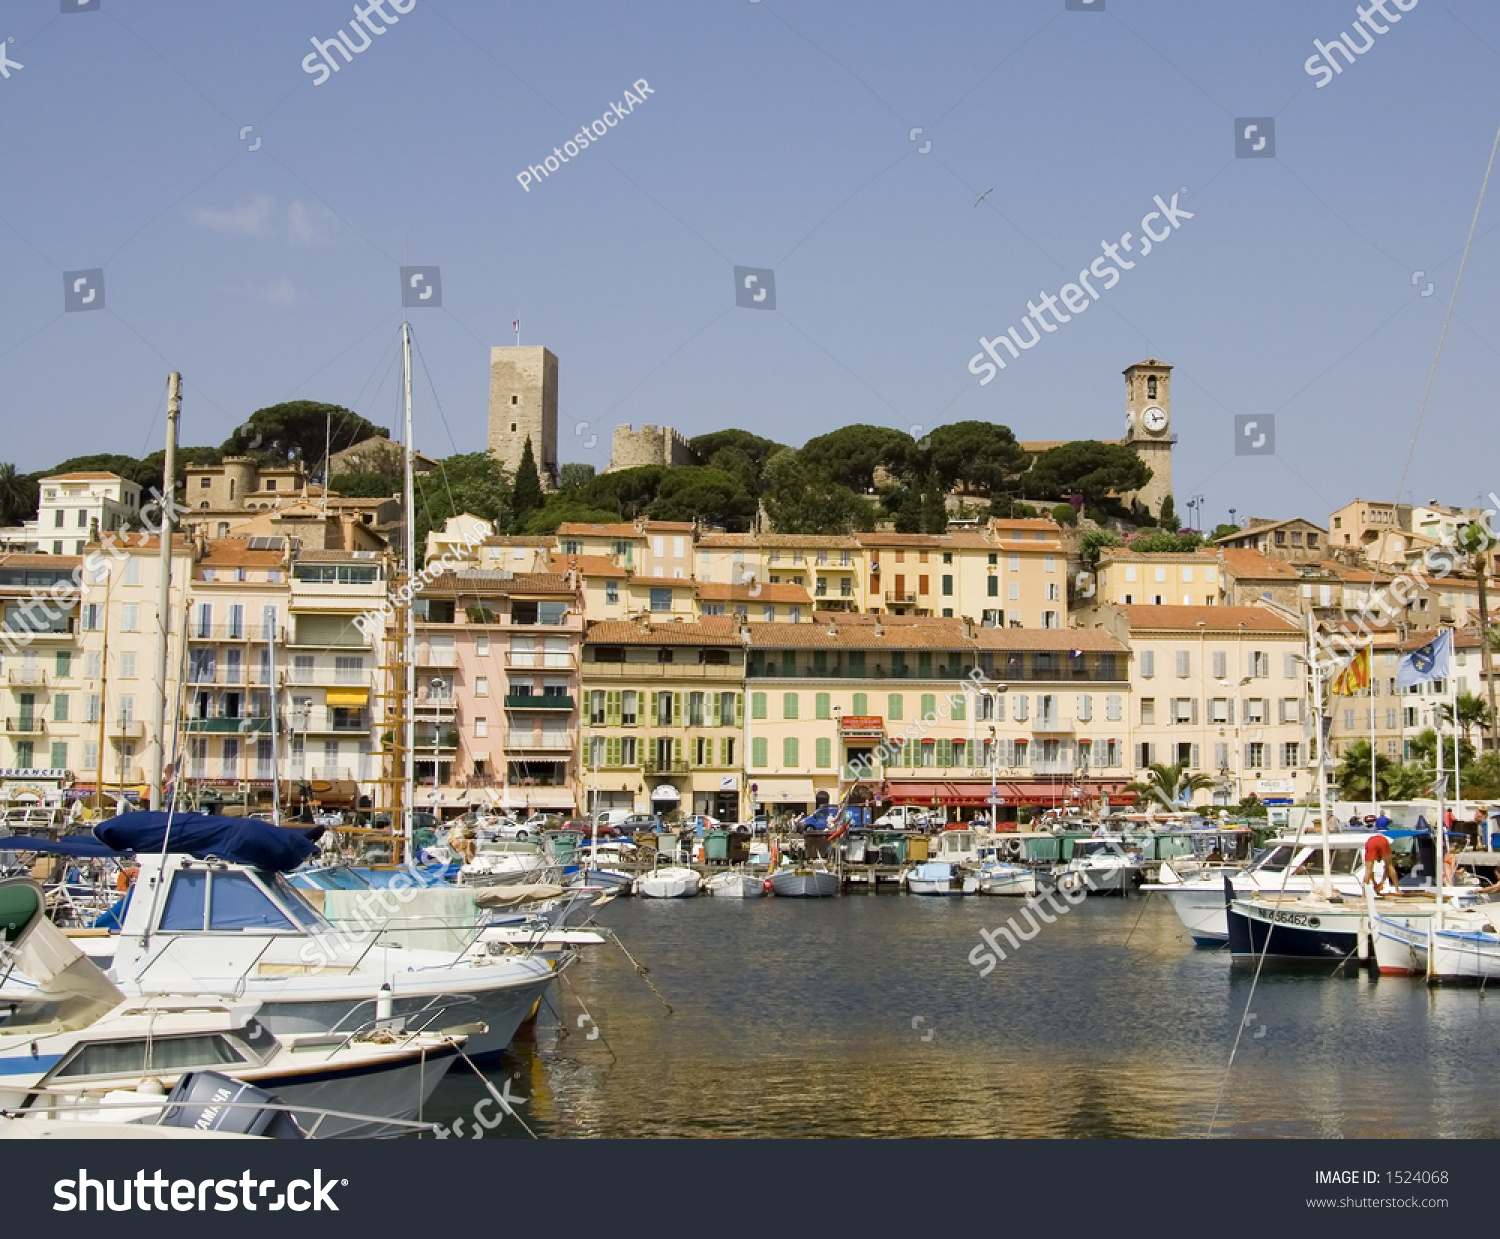 Typical View Of The City Of Cannes, French Riviera, Cote D'Azure: The ...